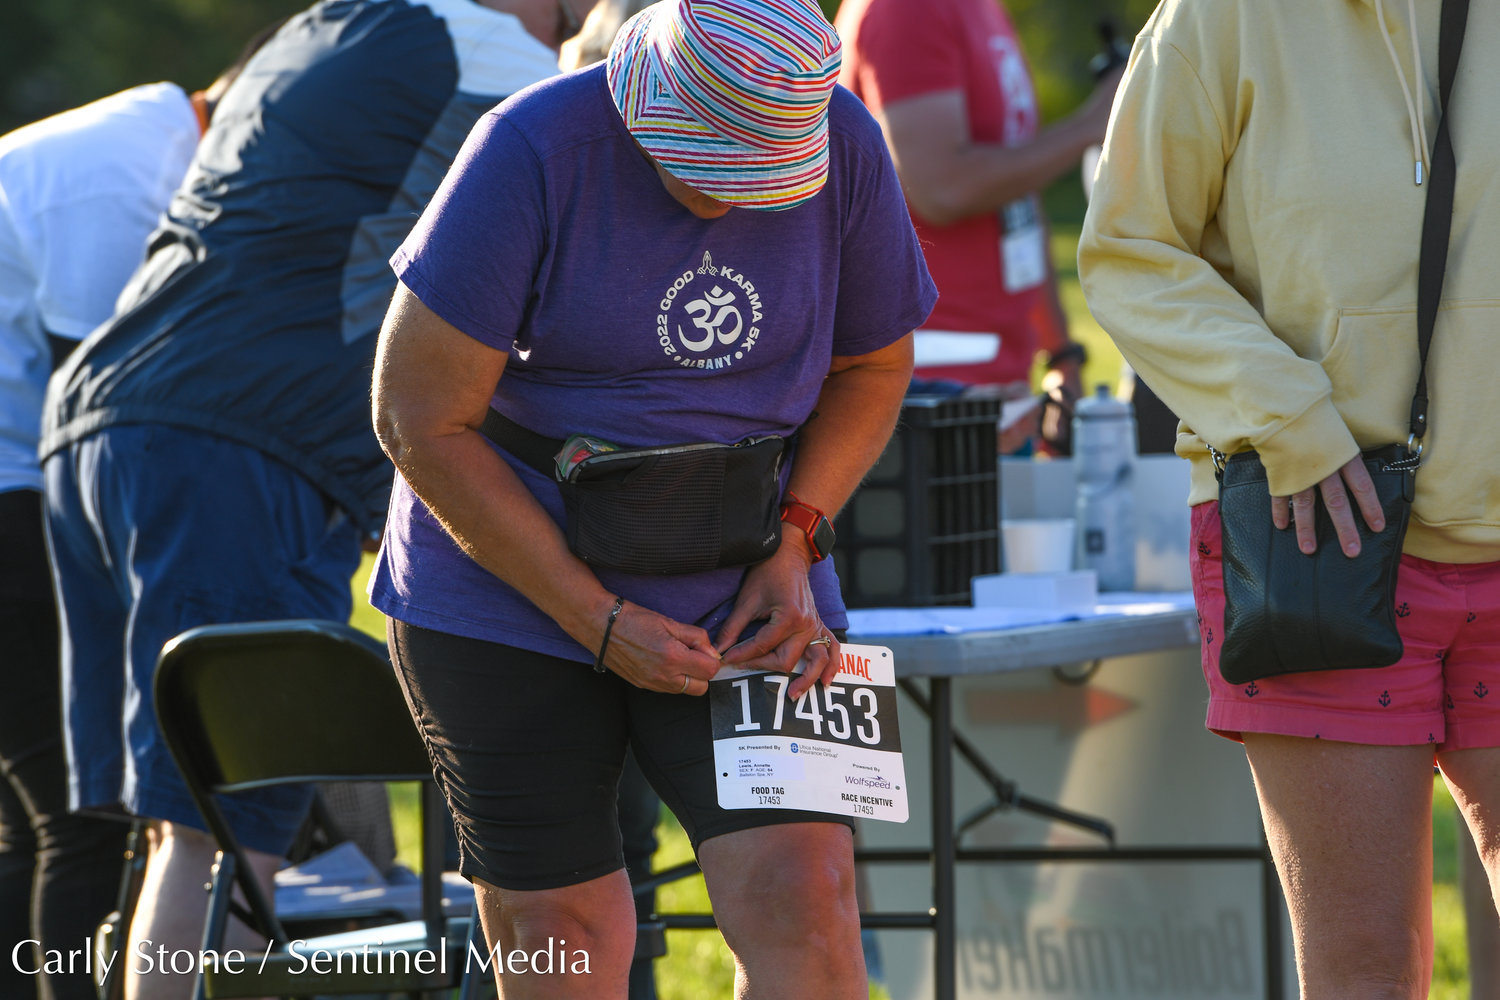 Annette Lewis, from Malta, fastens her bib number on her clothing as she gears up for the 2022 Boilermaker 5K.